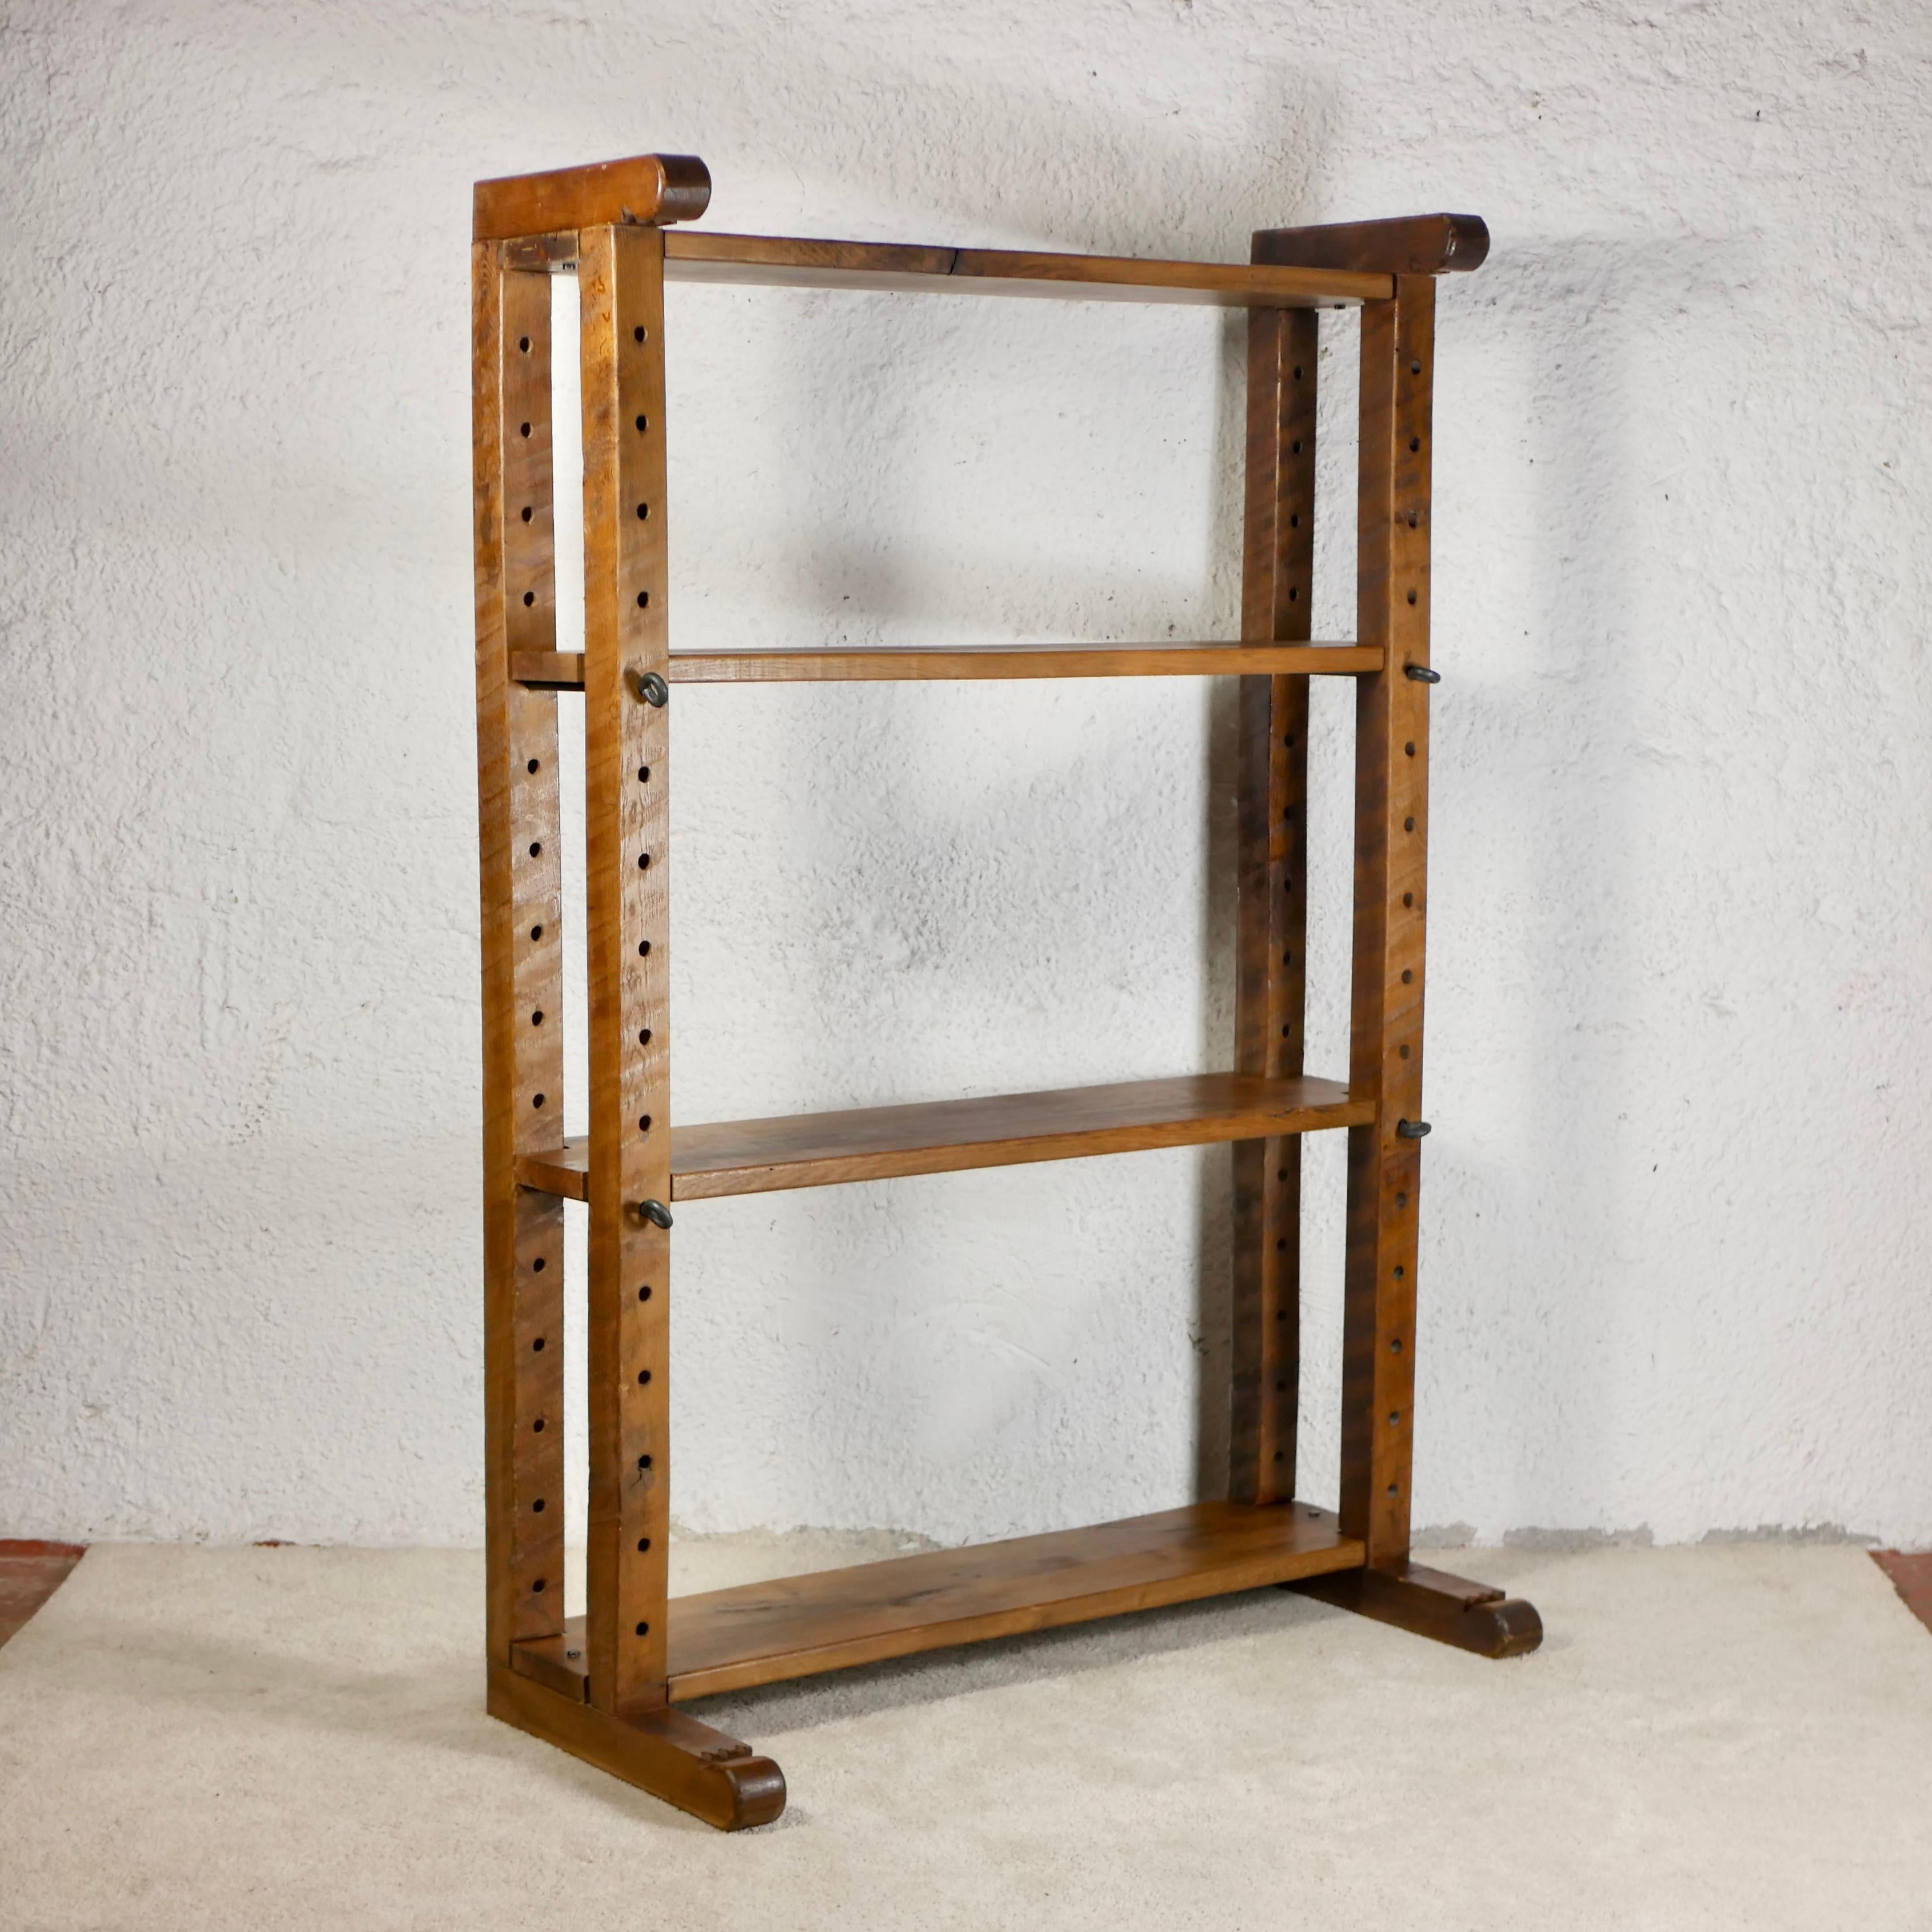 Stunning and high shelves cabinet, in massive oak wood, made in the 1950s in the Netherlands, where it used to be a cheese shelves « Stokkenkast ».
Sturdy, rustic, practical, you can either use it with or without the bottom part.
Dimensions : H179,